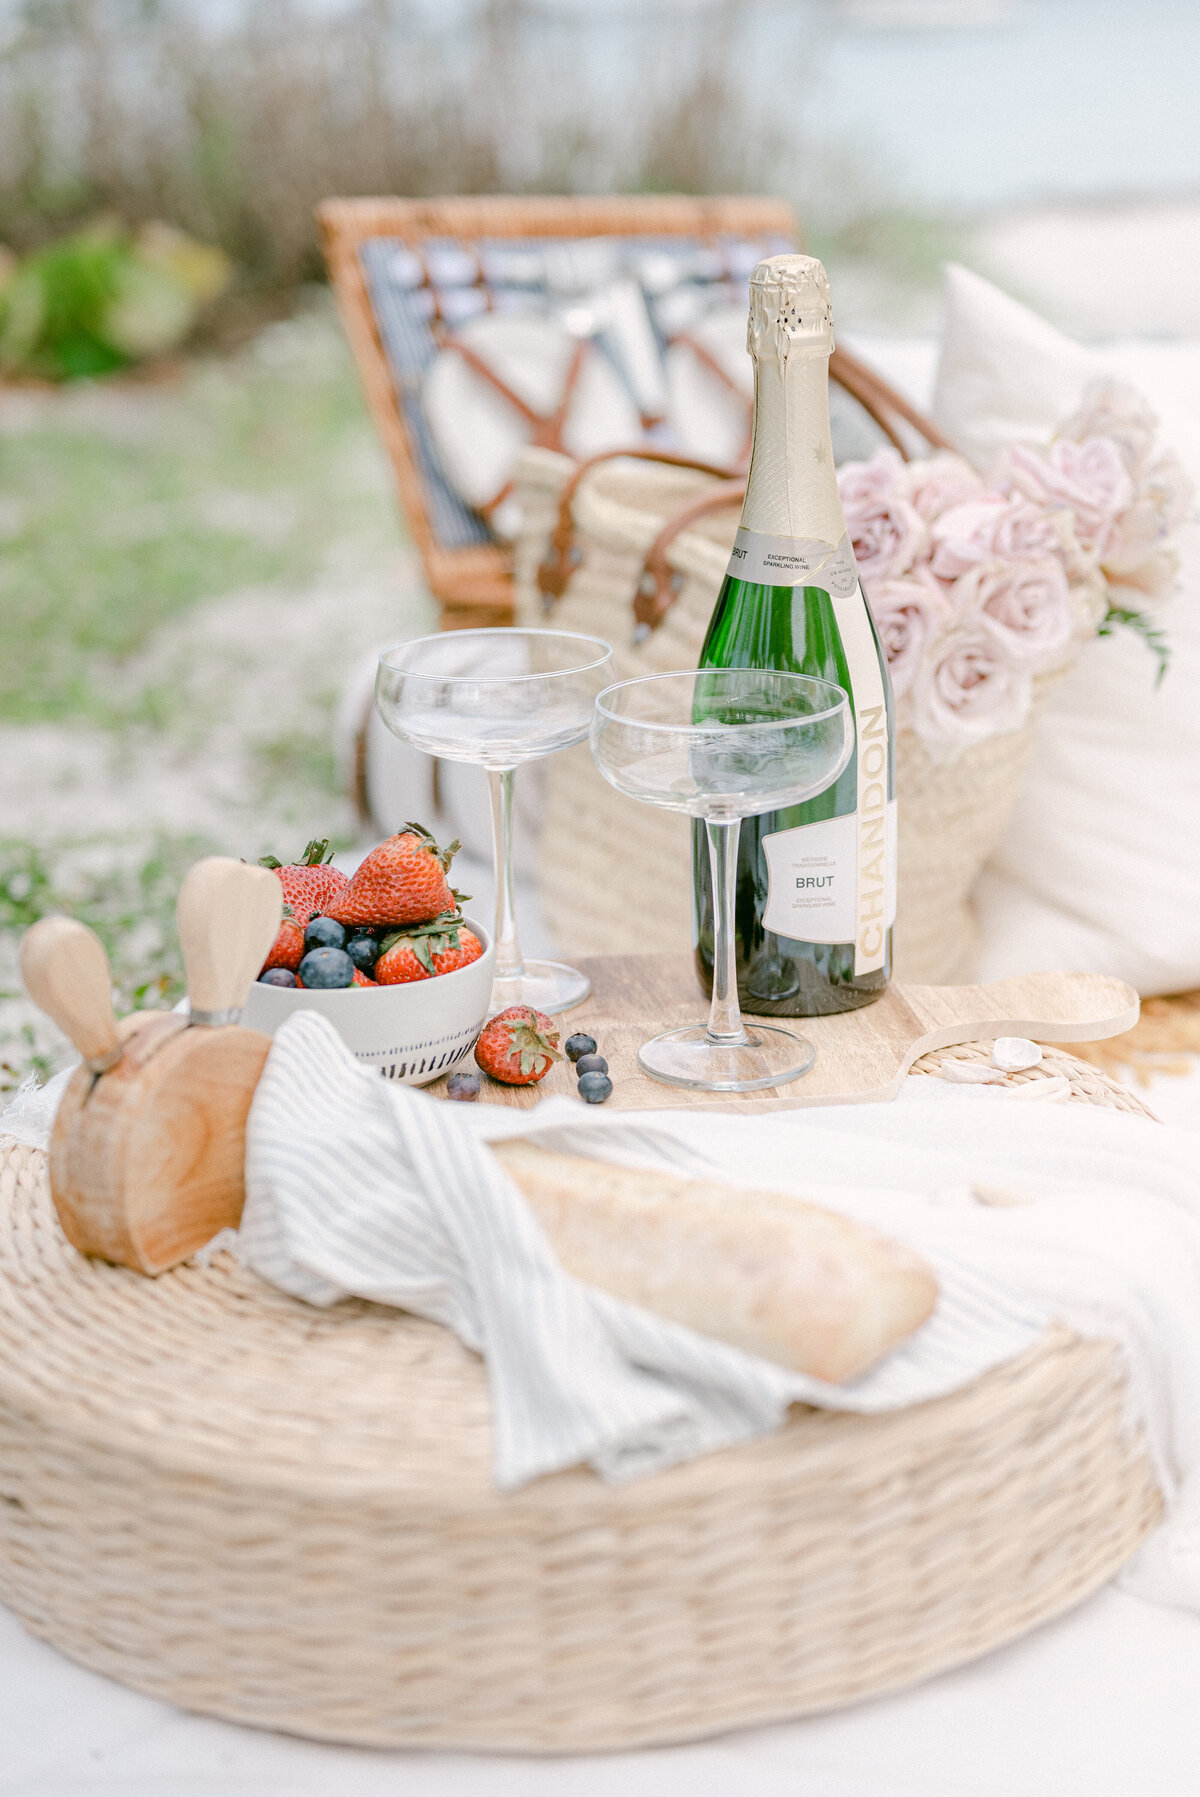 Flowers and champagne, strawberries, cheese and baguette